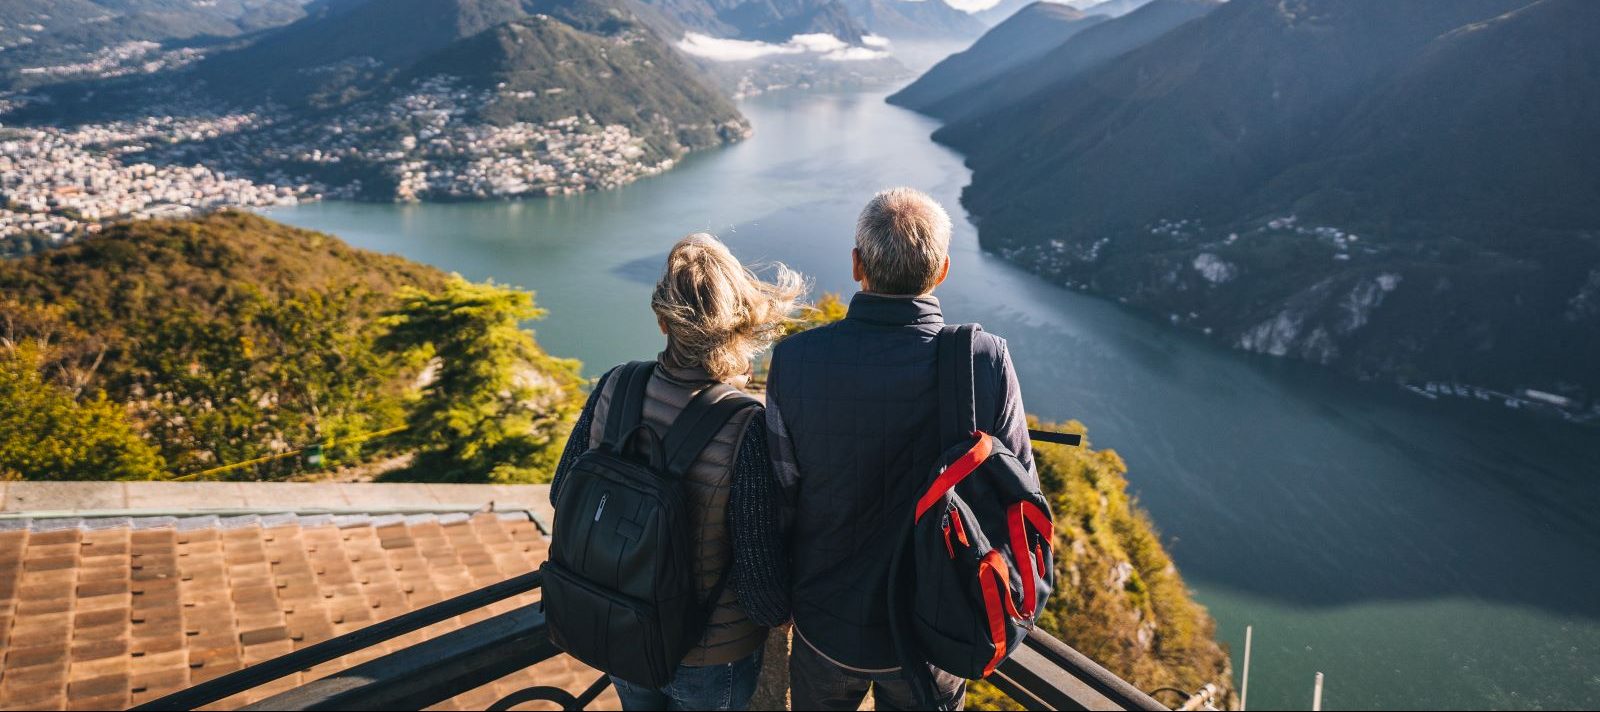 7 Tips for Traveling with a Person Living With Dementia